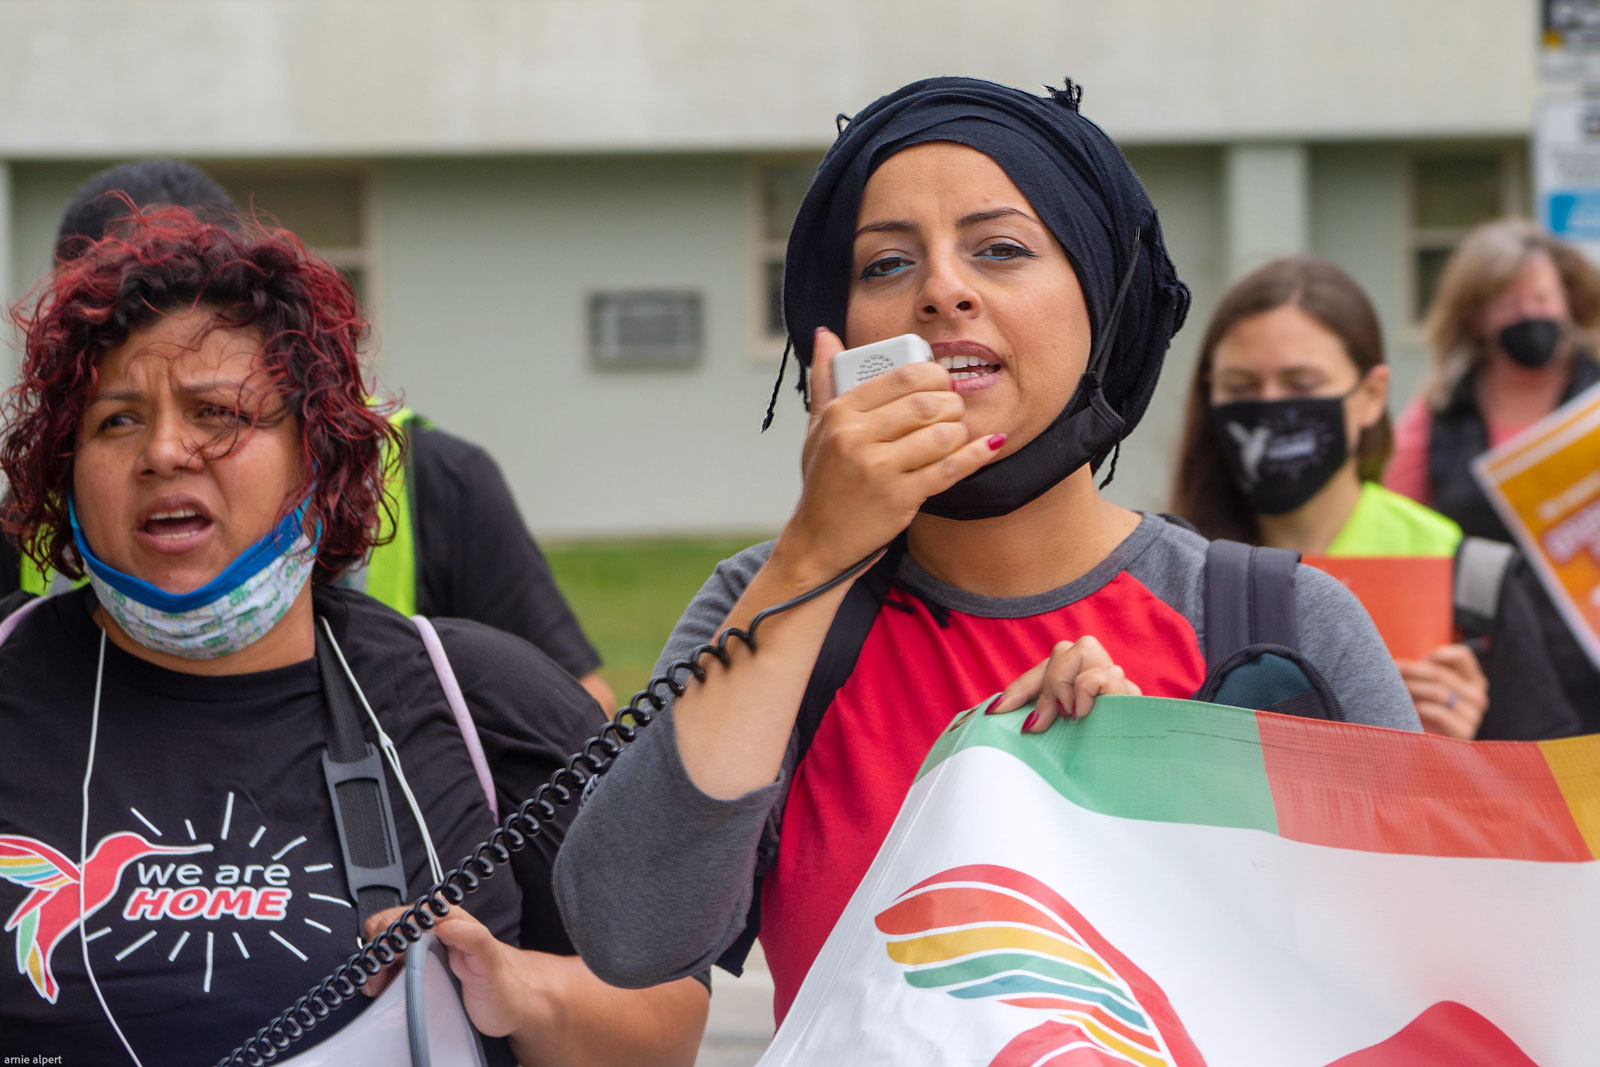 A woman in a hijab leads a march holding a banner and a bullhorn microphone